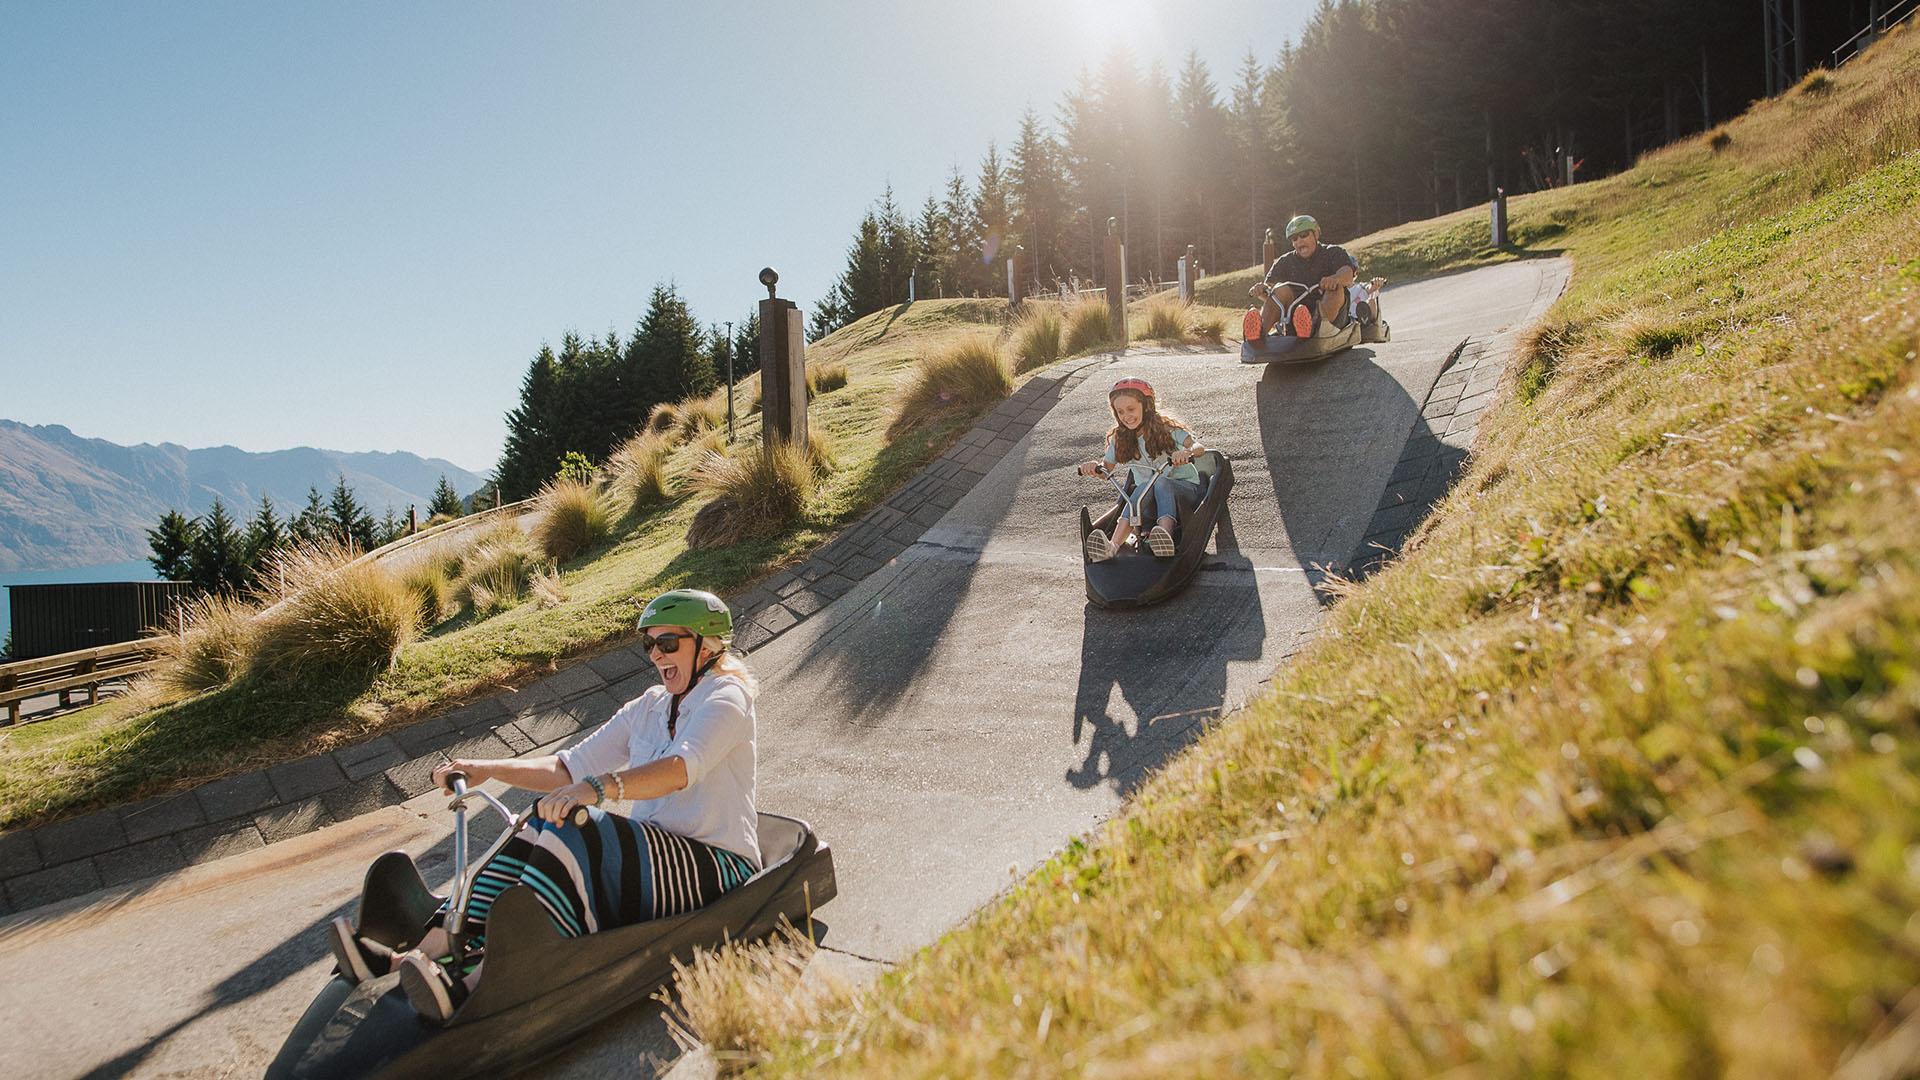 Family going down the luge track and having fun